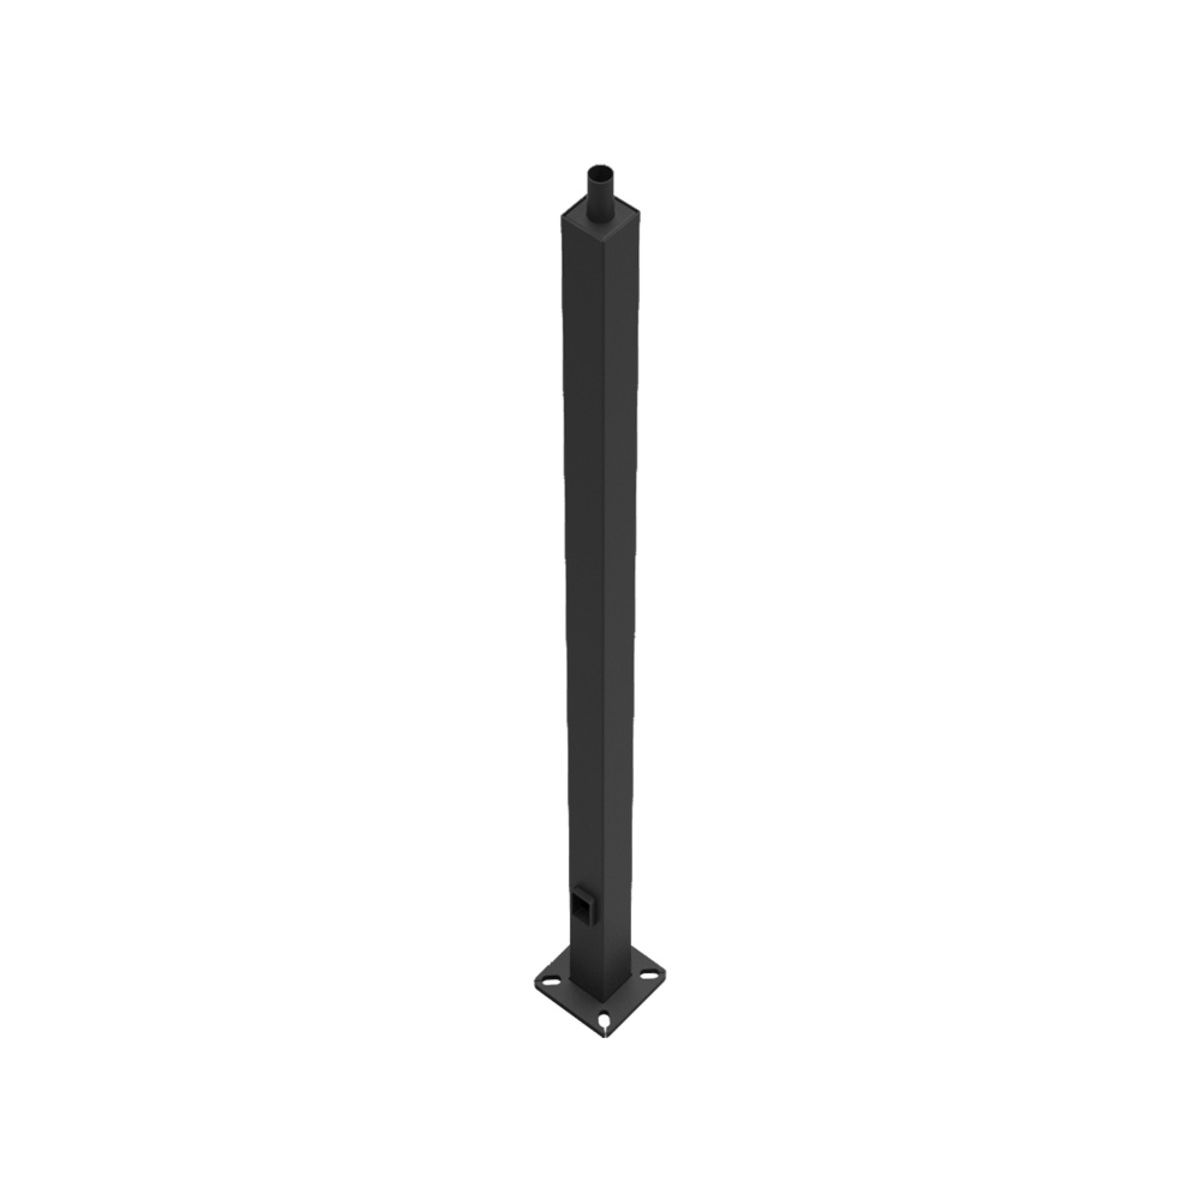 25 Ft Square Steel Tenon Top Pole 5 In. Shaft 7 Gauge